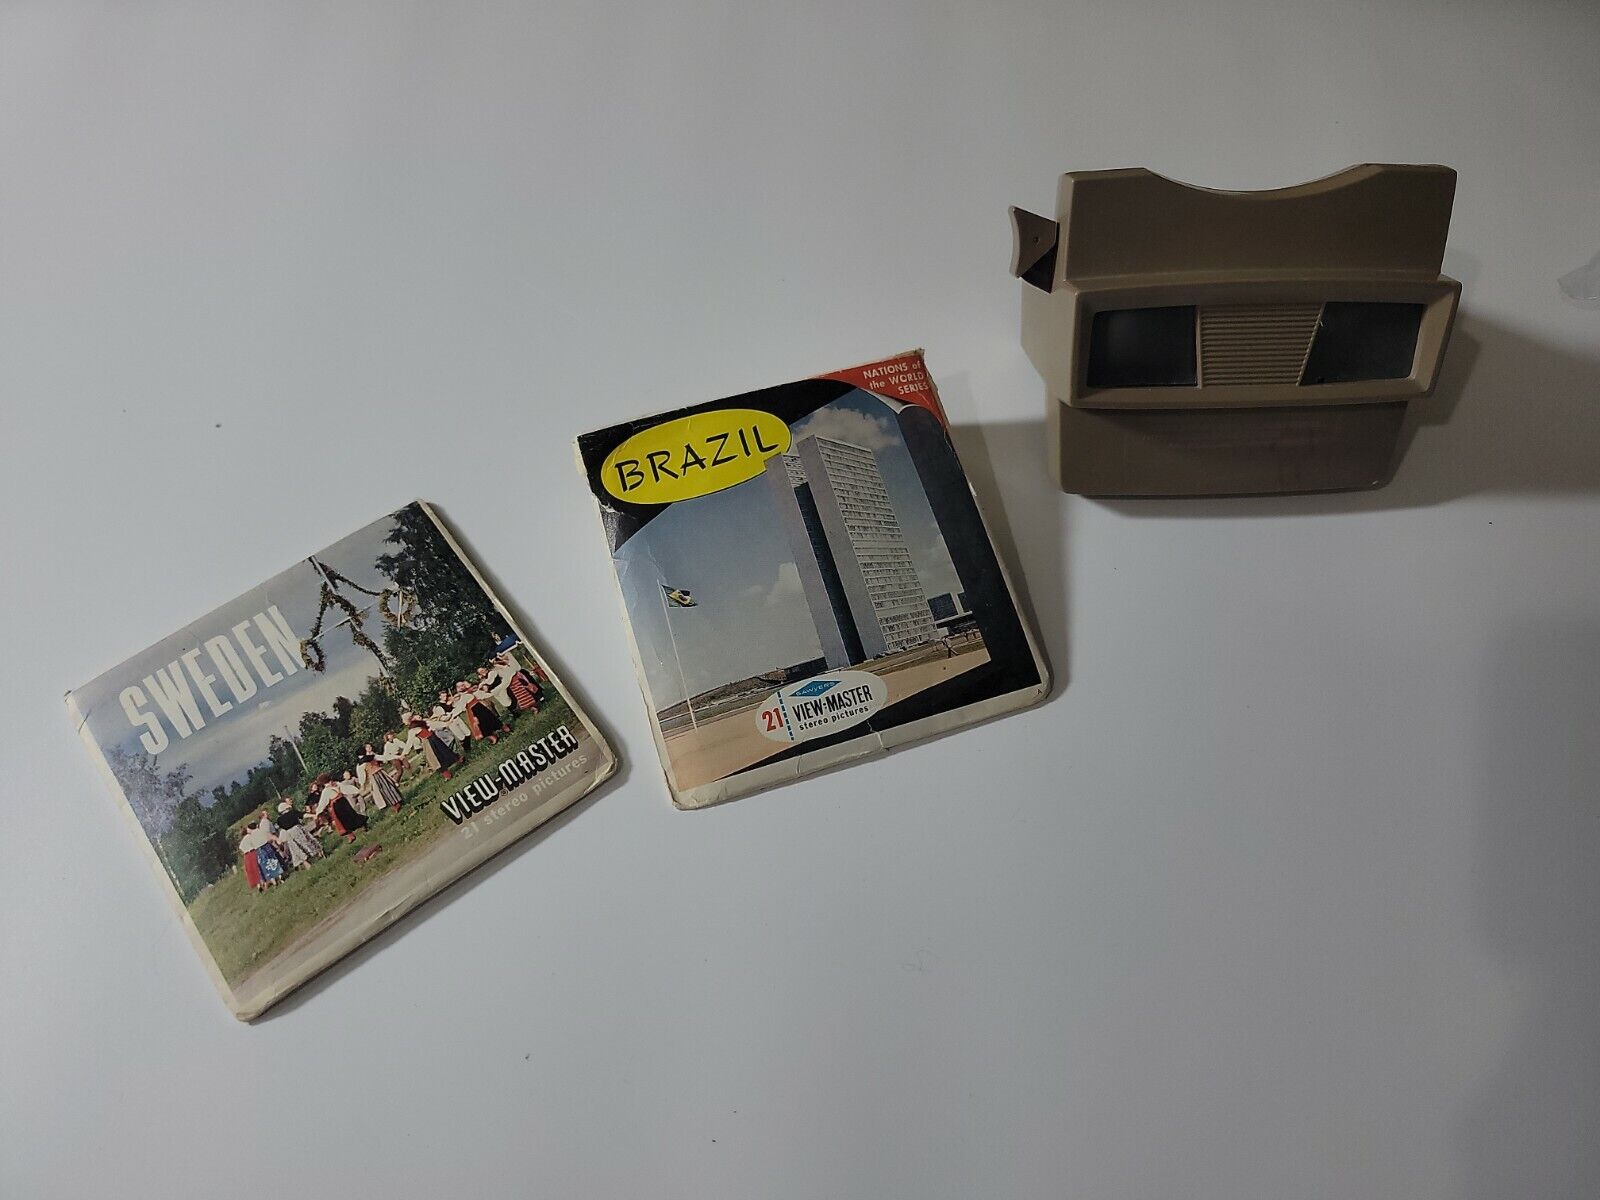 Vintage View-Master Viewer with Brazil and Sweden slides